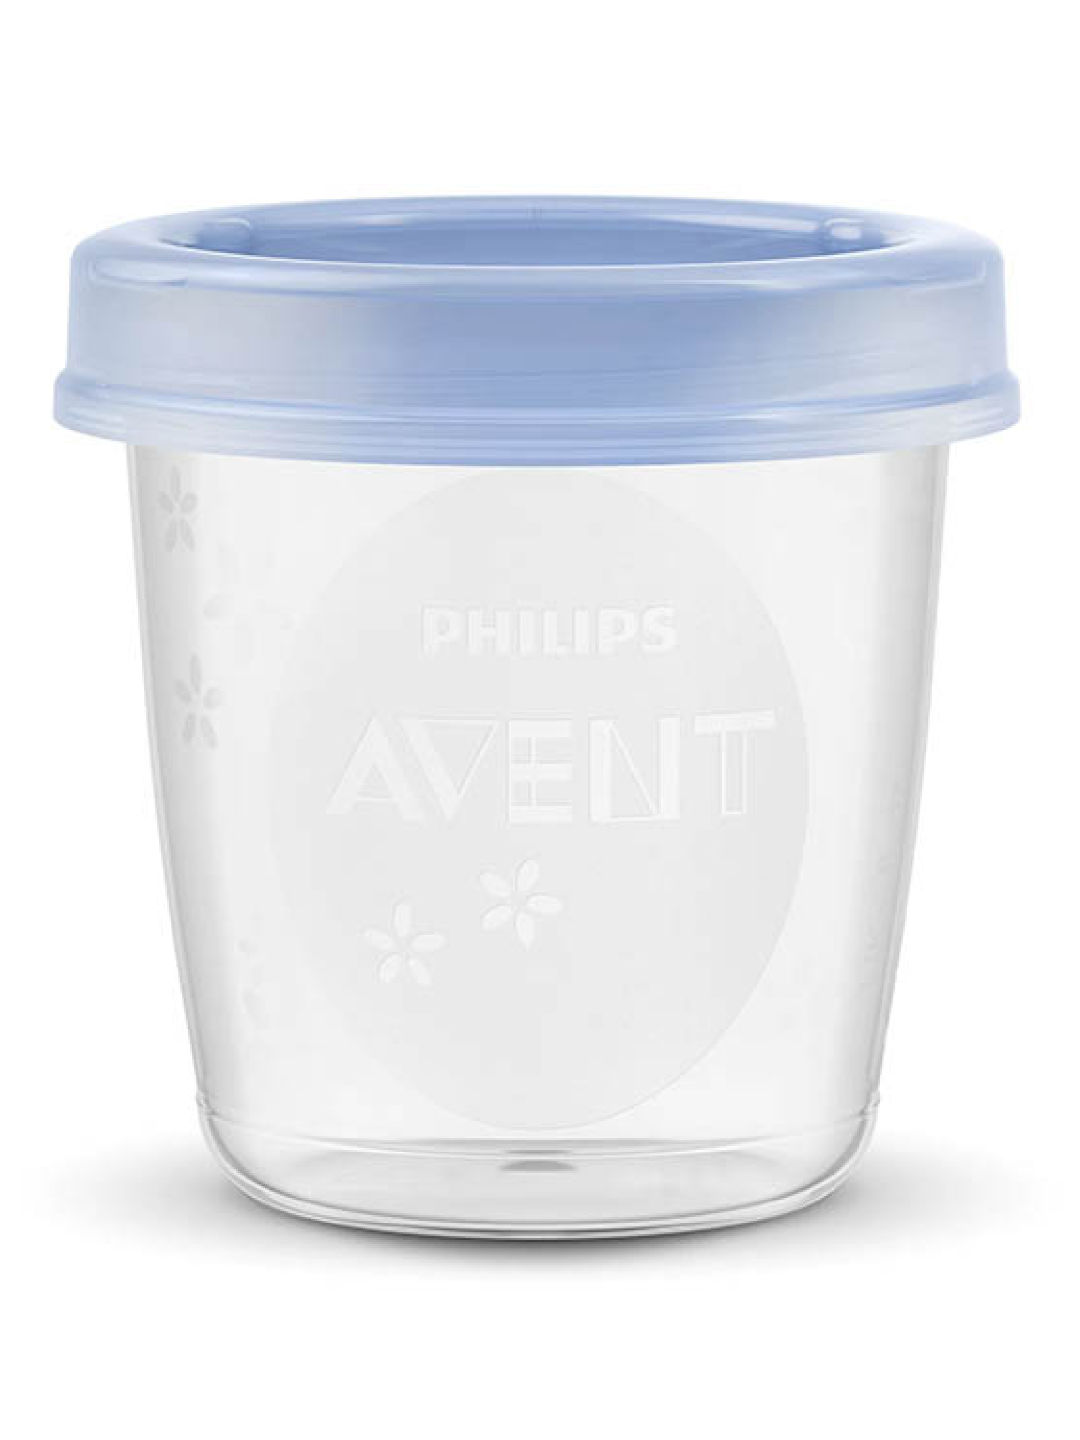 Avent Breast Milk Storage Cups with Lids & Adapter (10-pack)